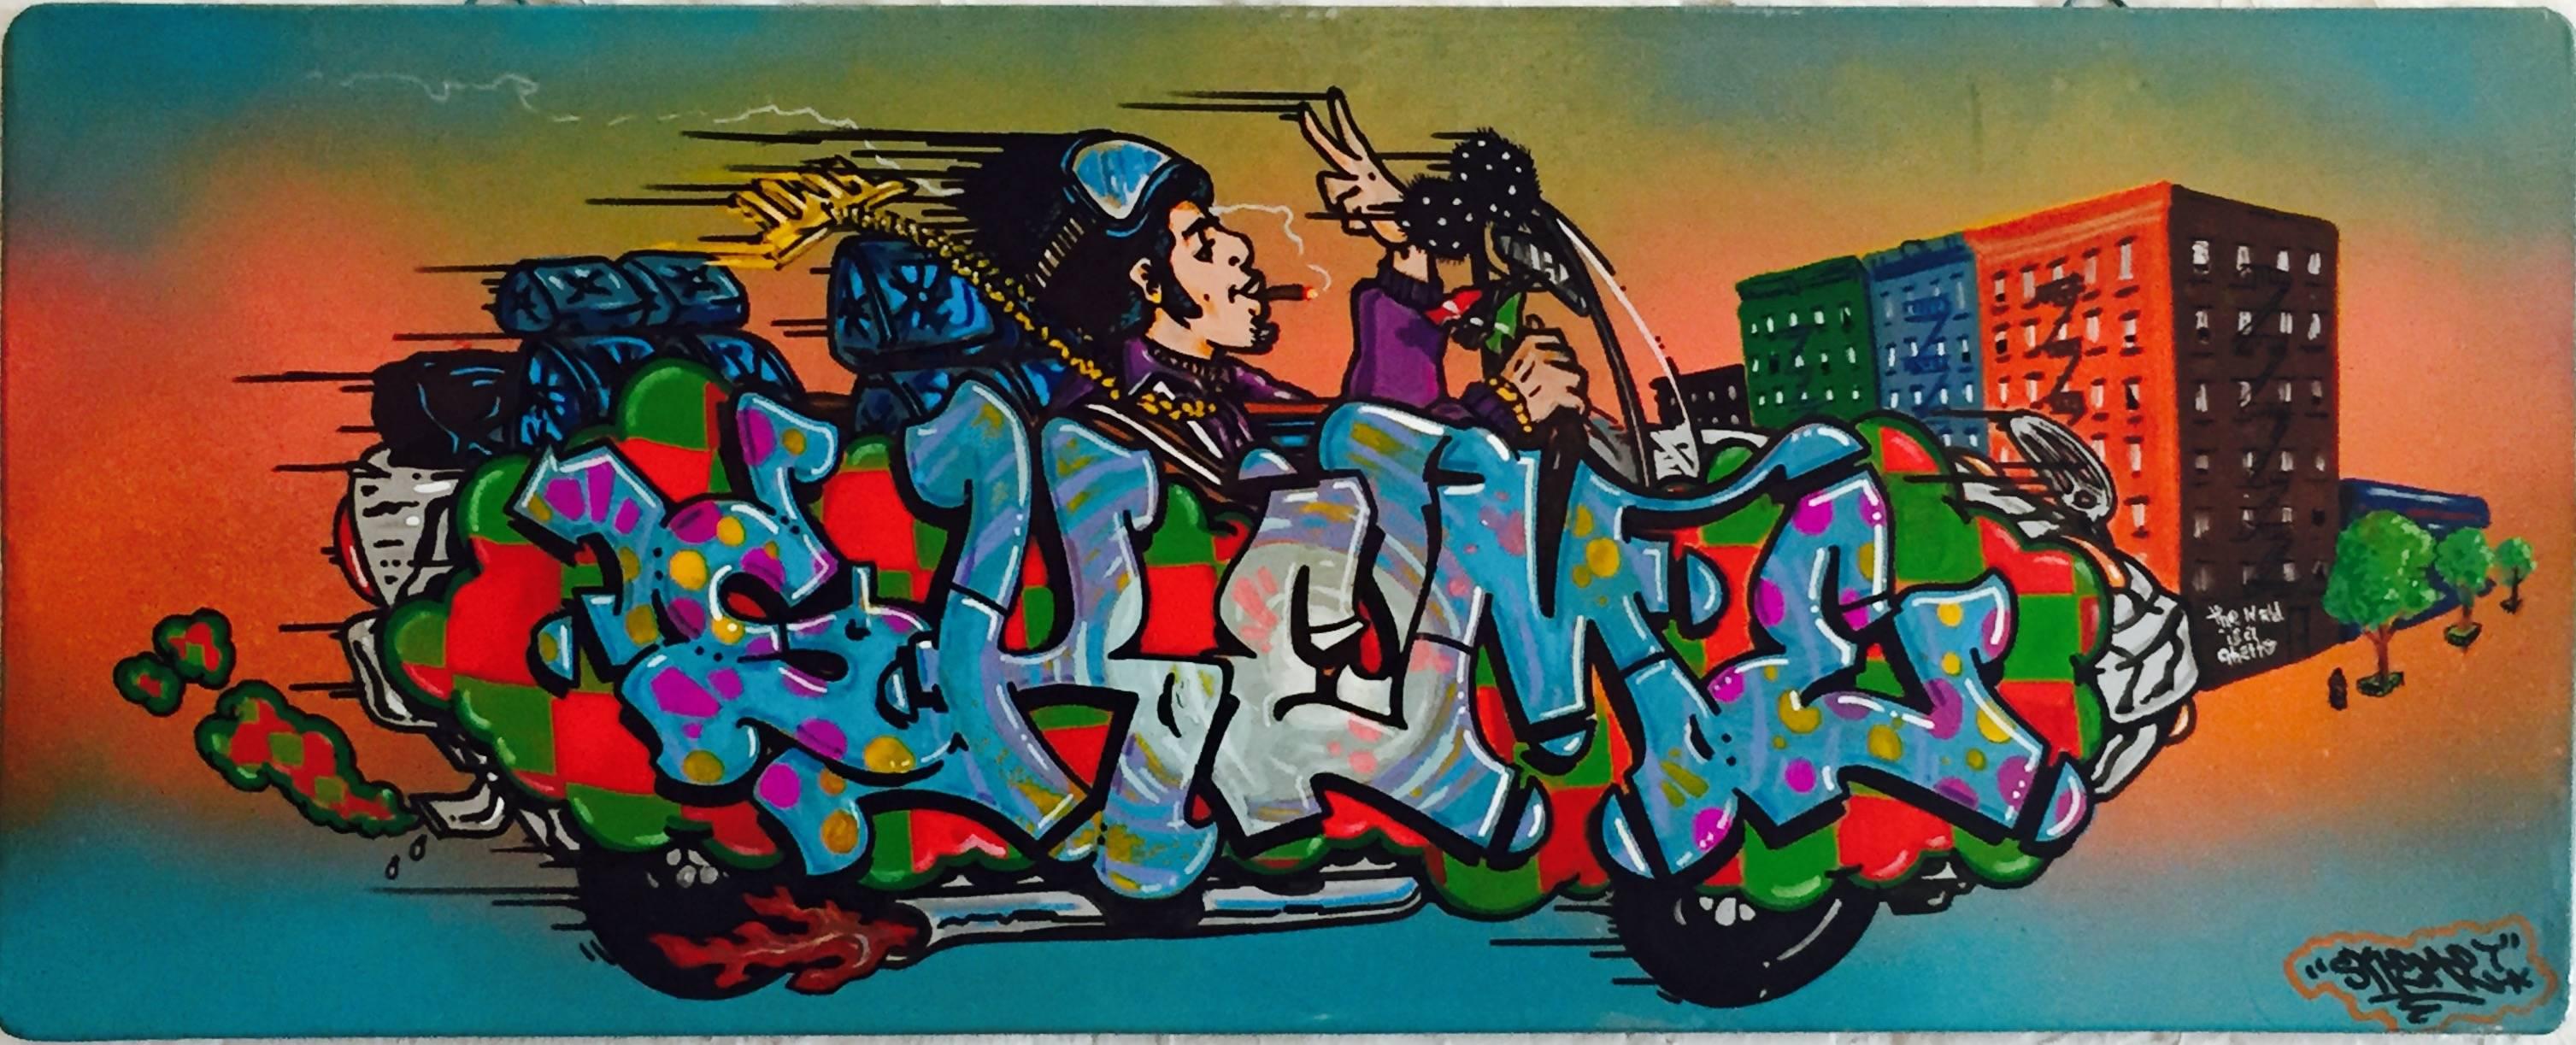 The World is a Ghetto - Painting by Skeme